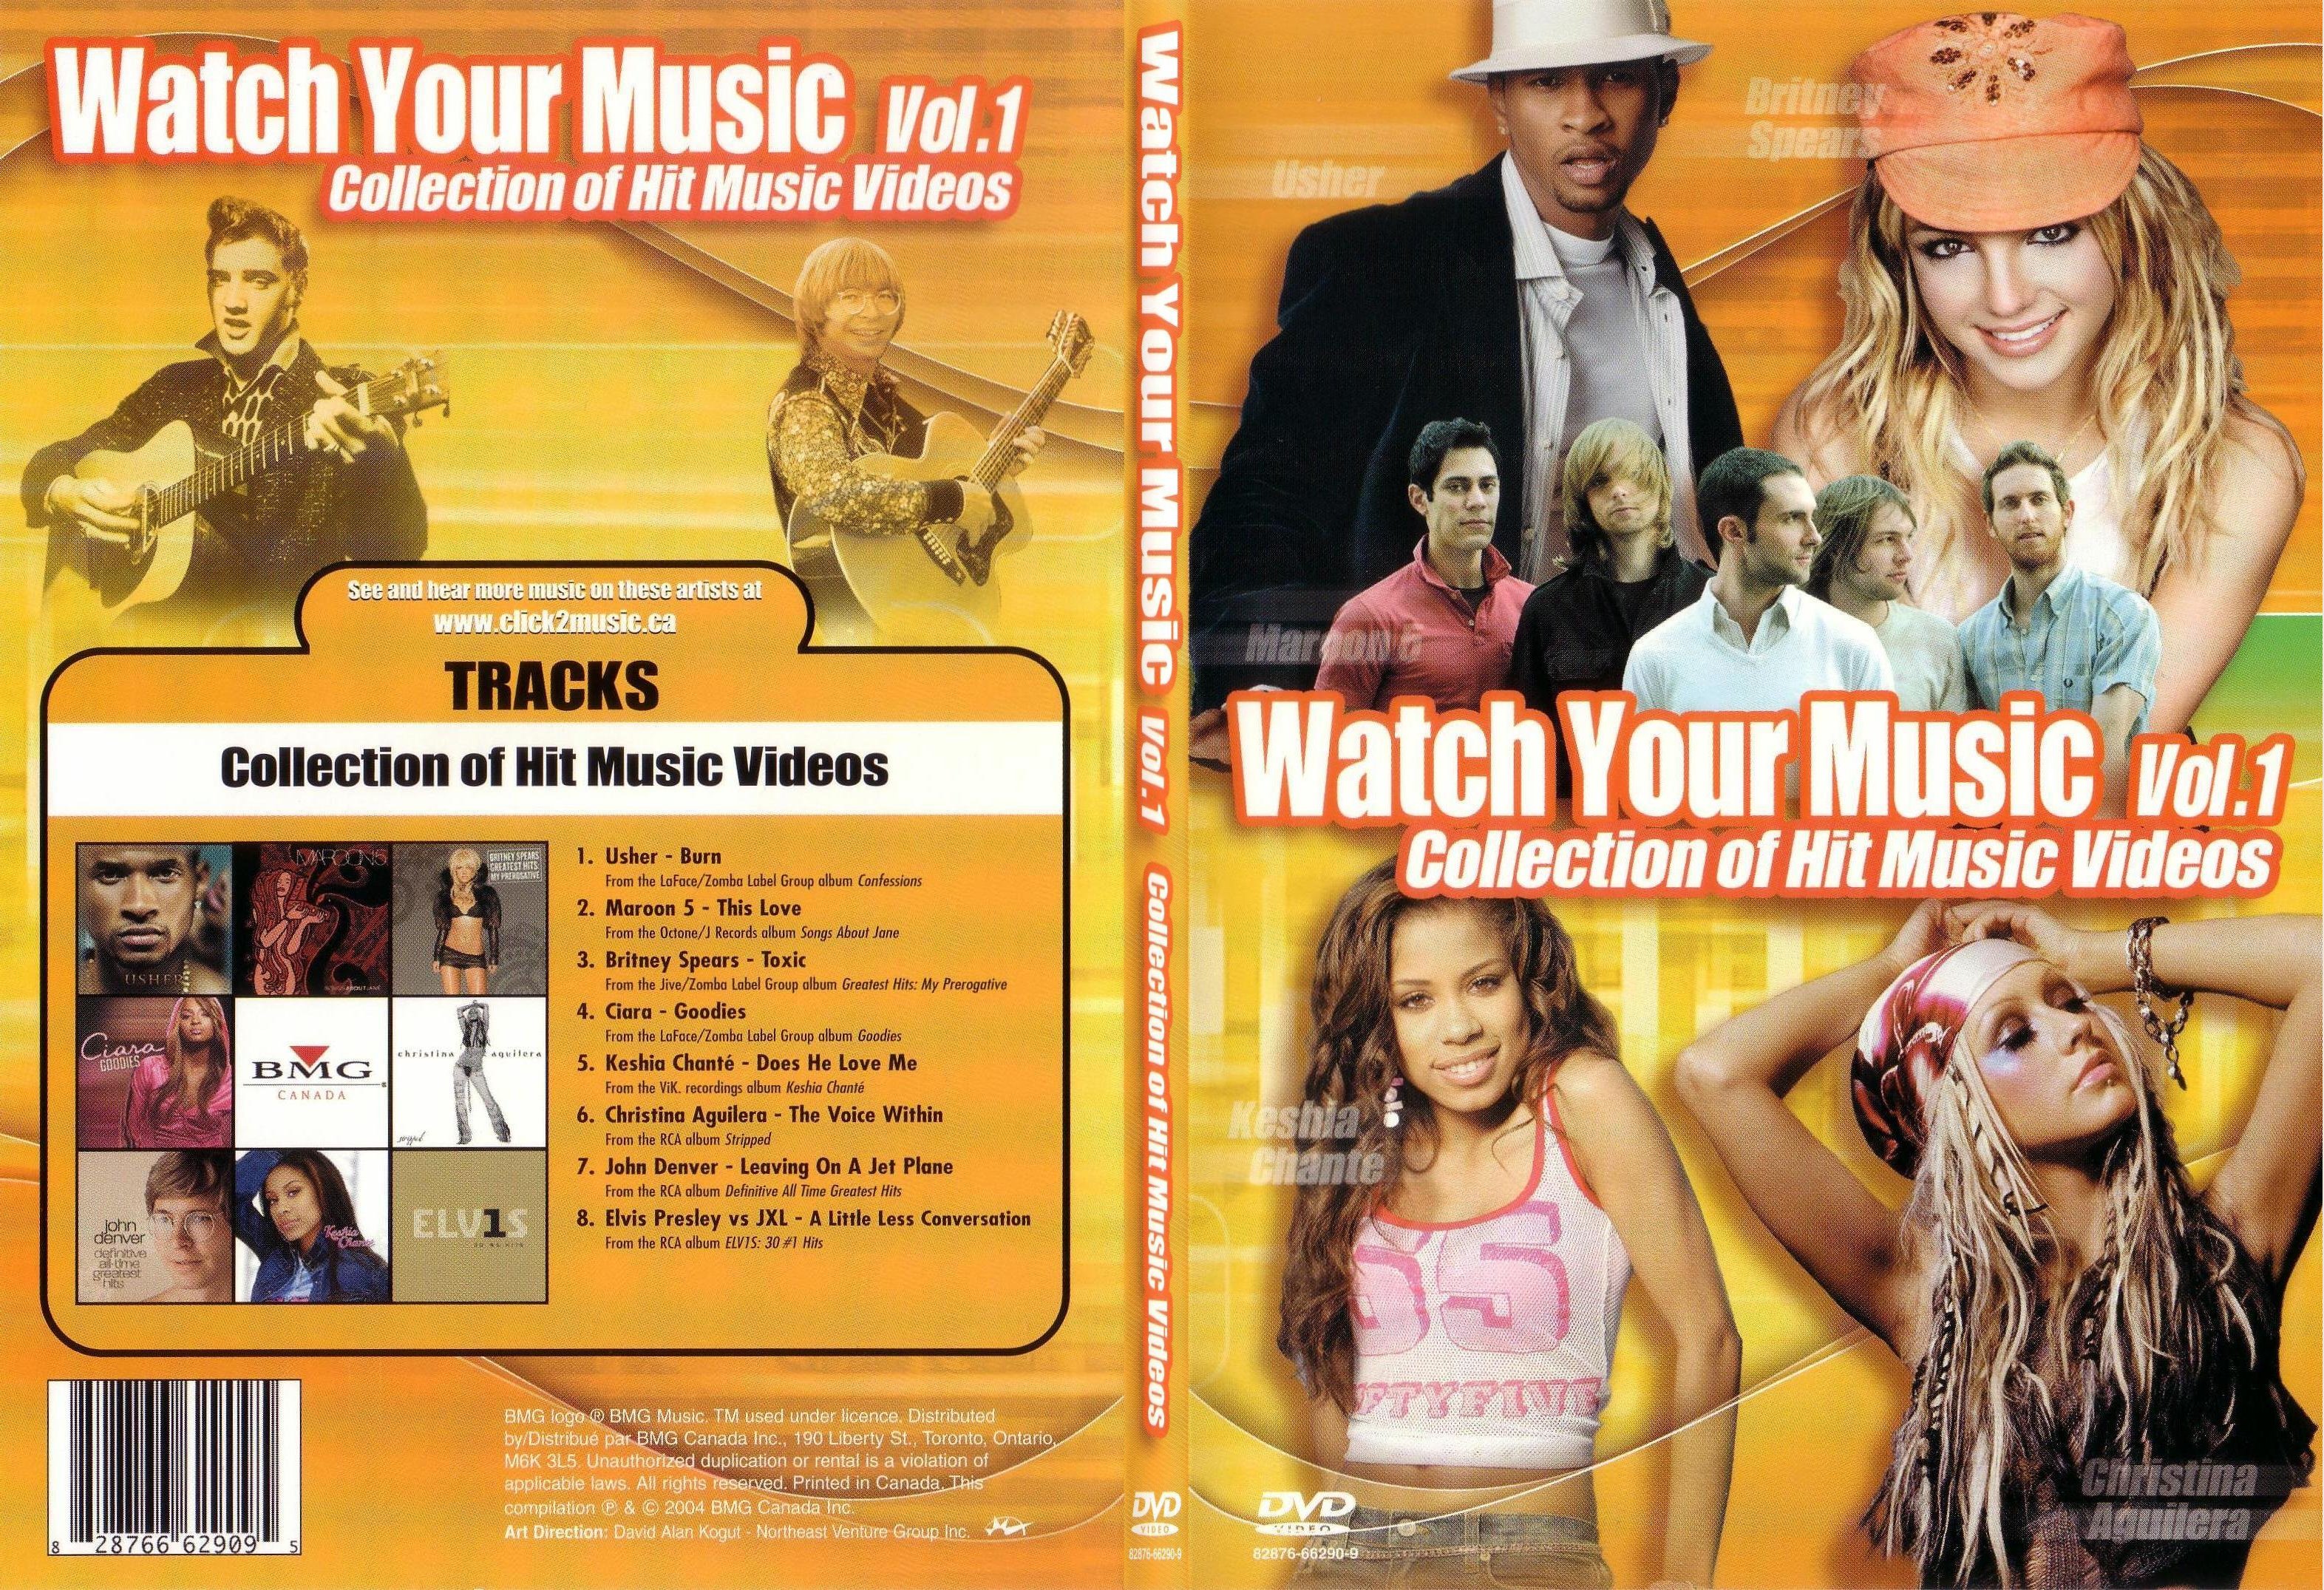 Jaquette DVD Watch your music vol 1 - SLIM